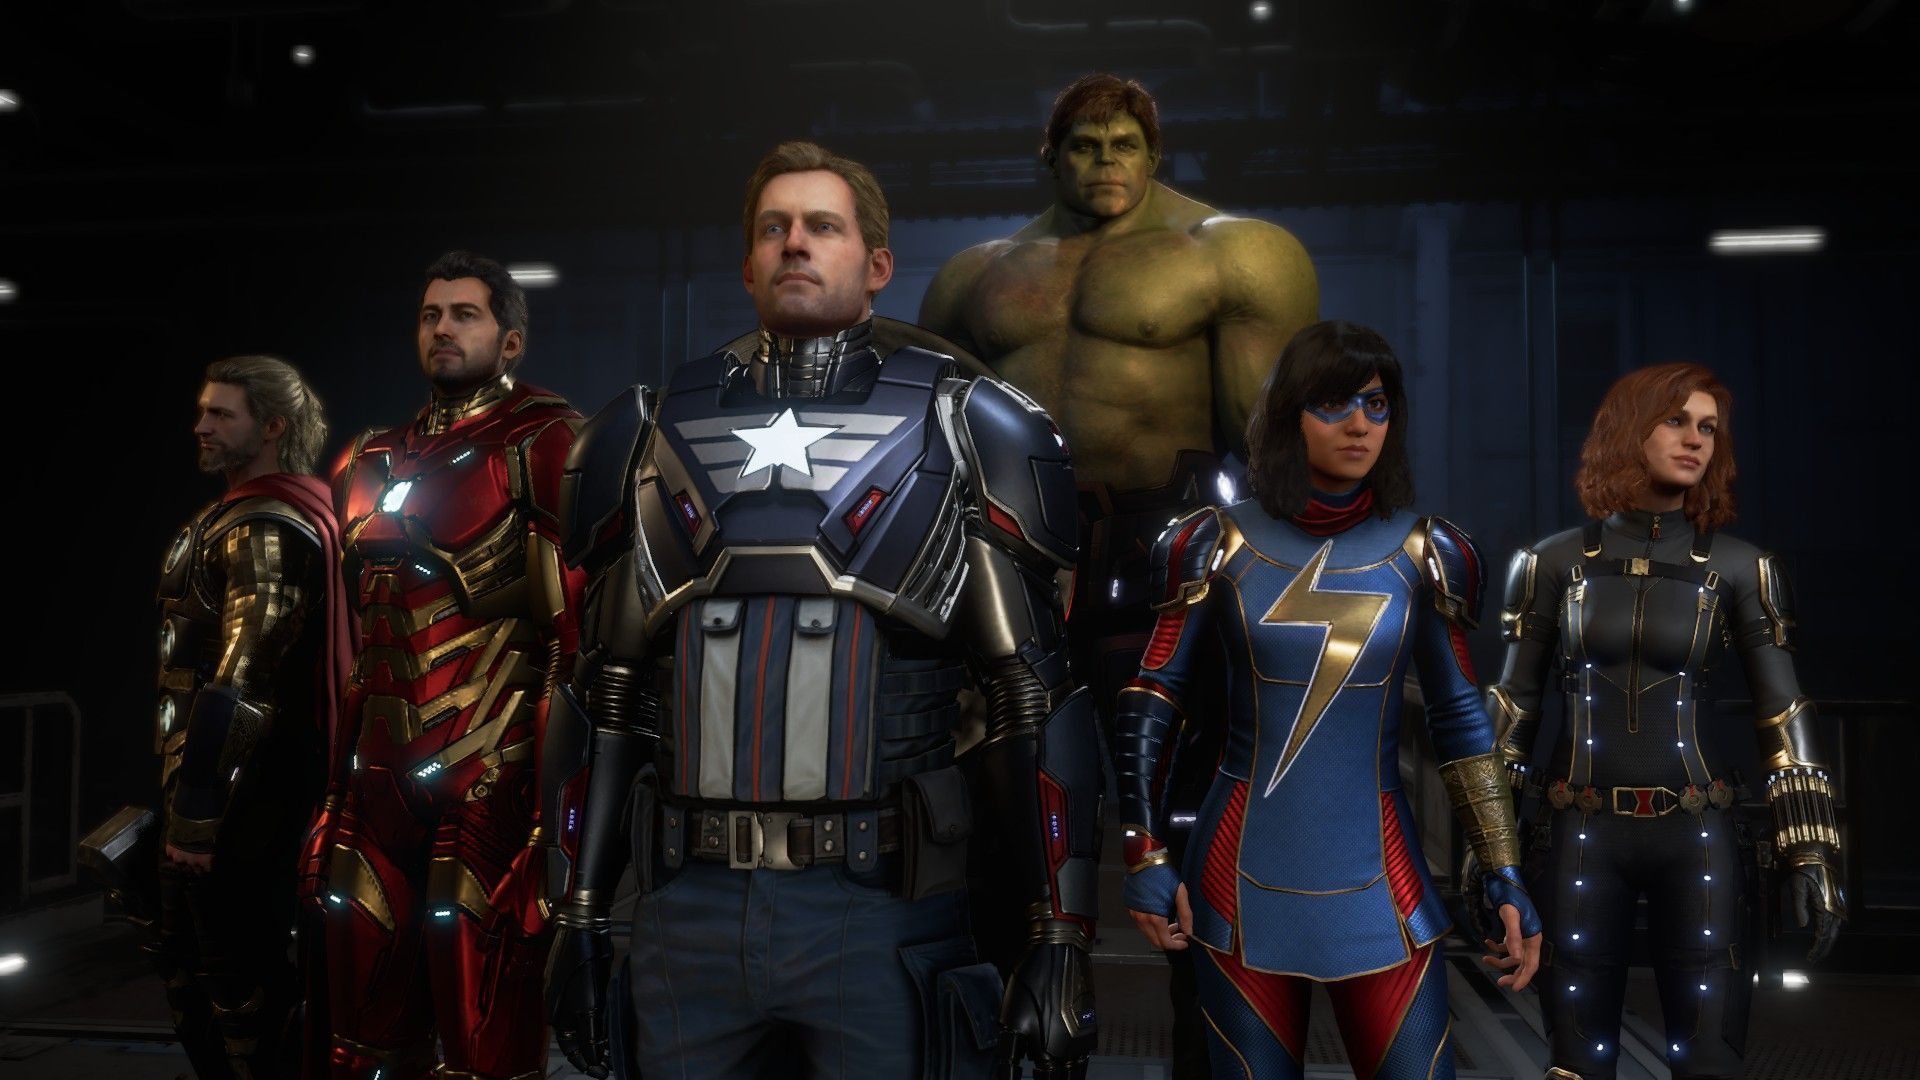 Marvel's Avengers: An Interesting Story with Repetitive, Frustrating Gameplay